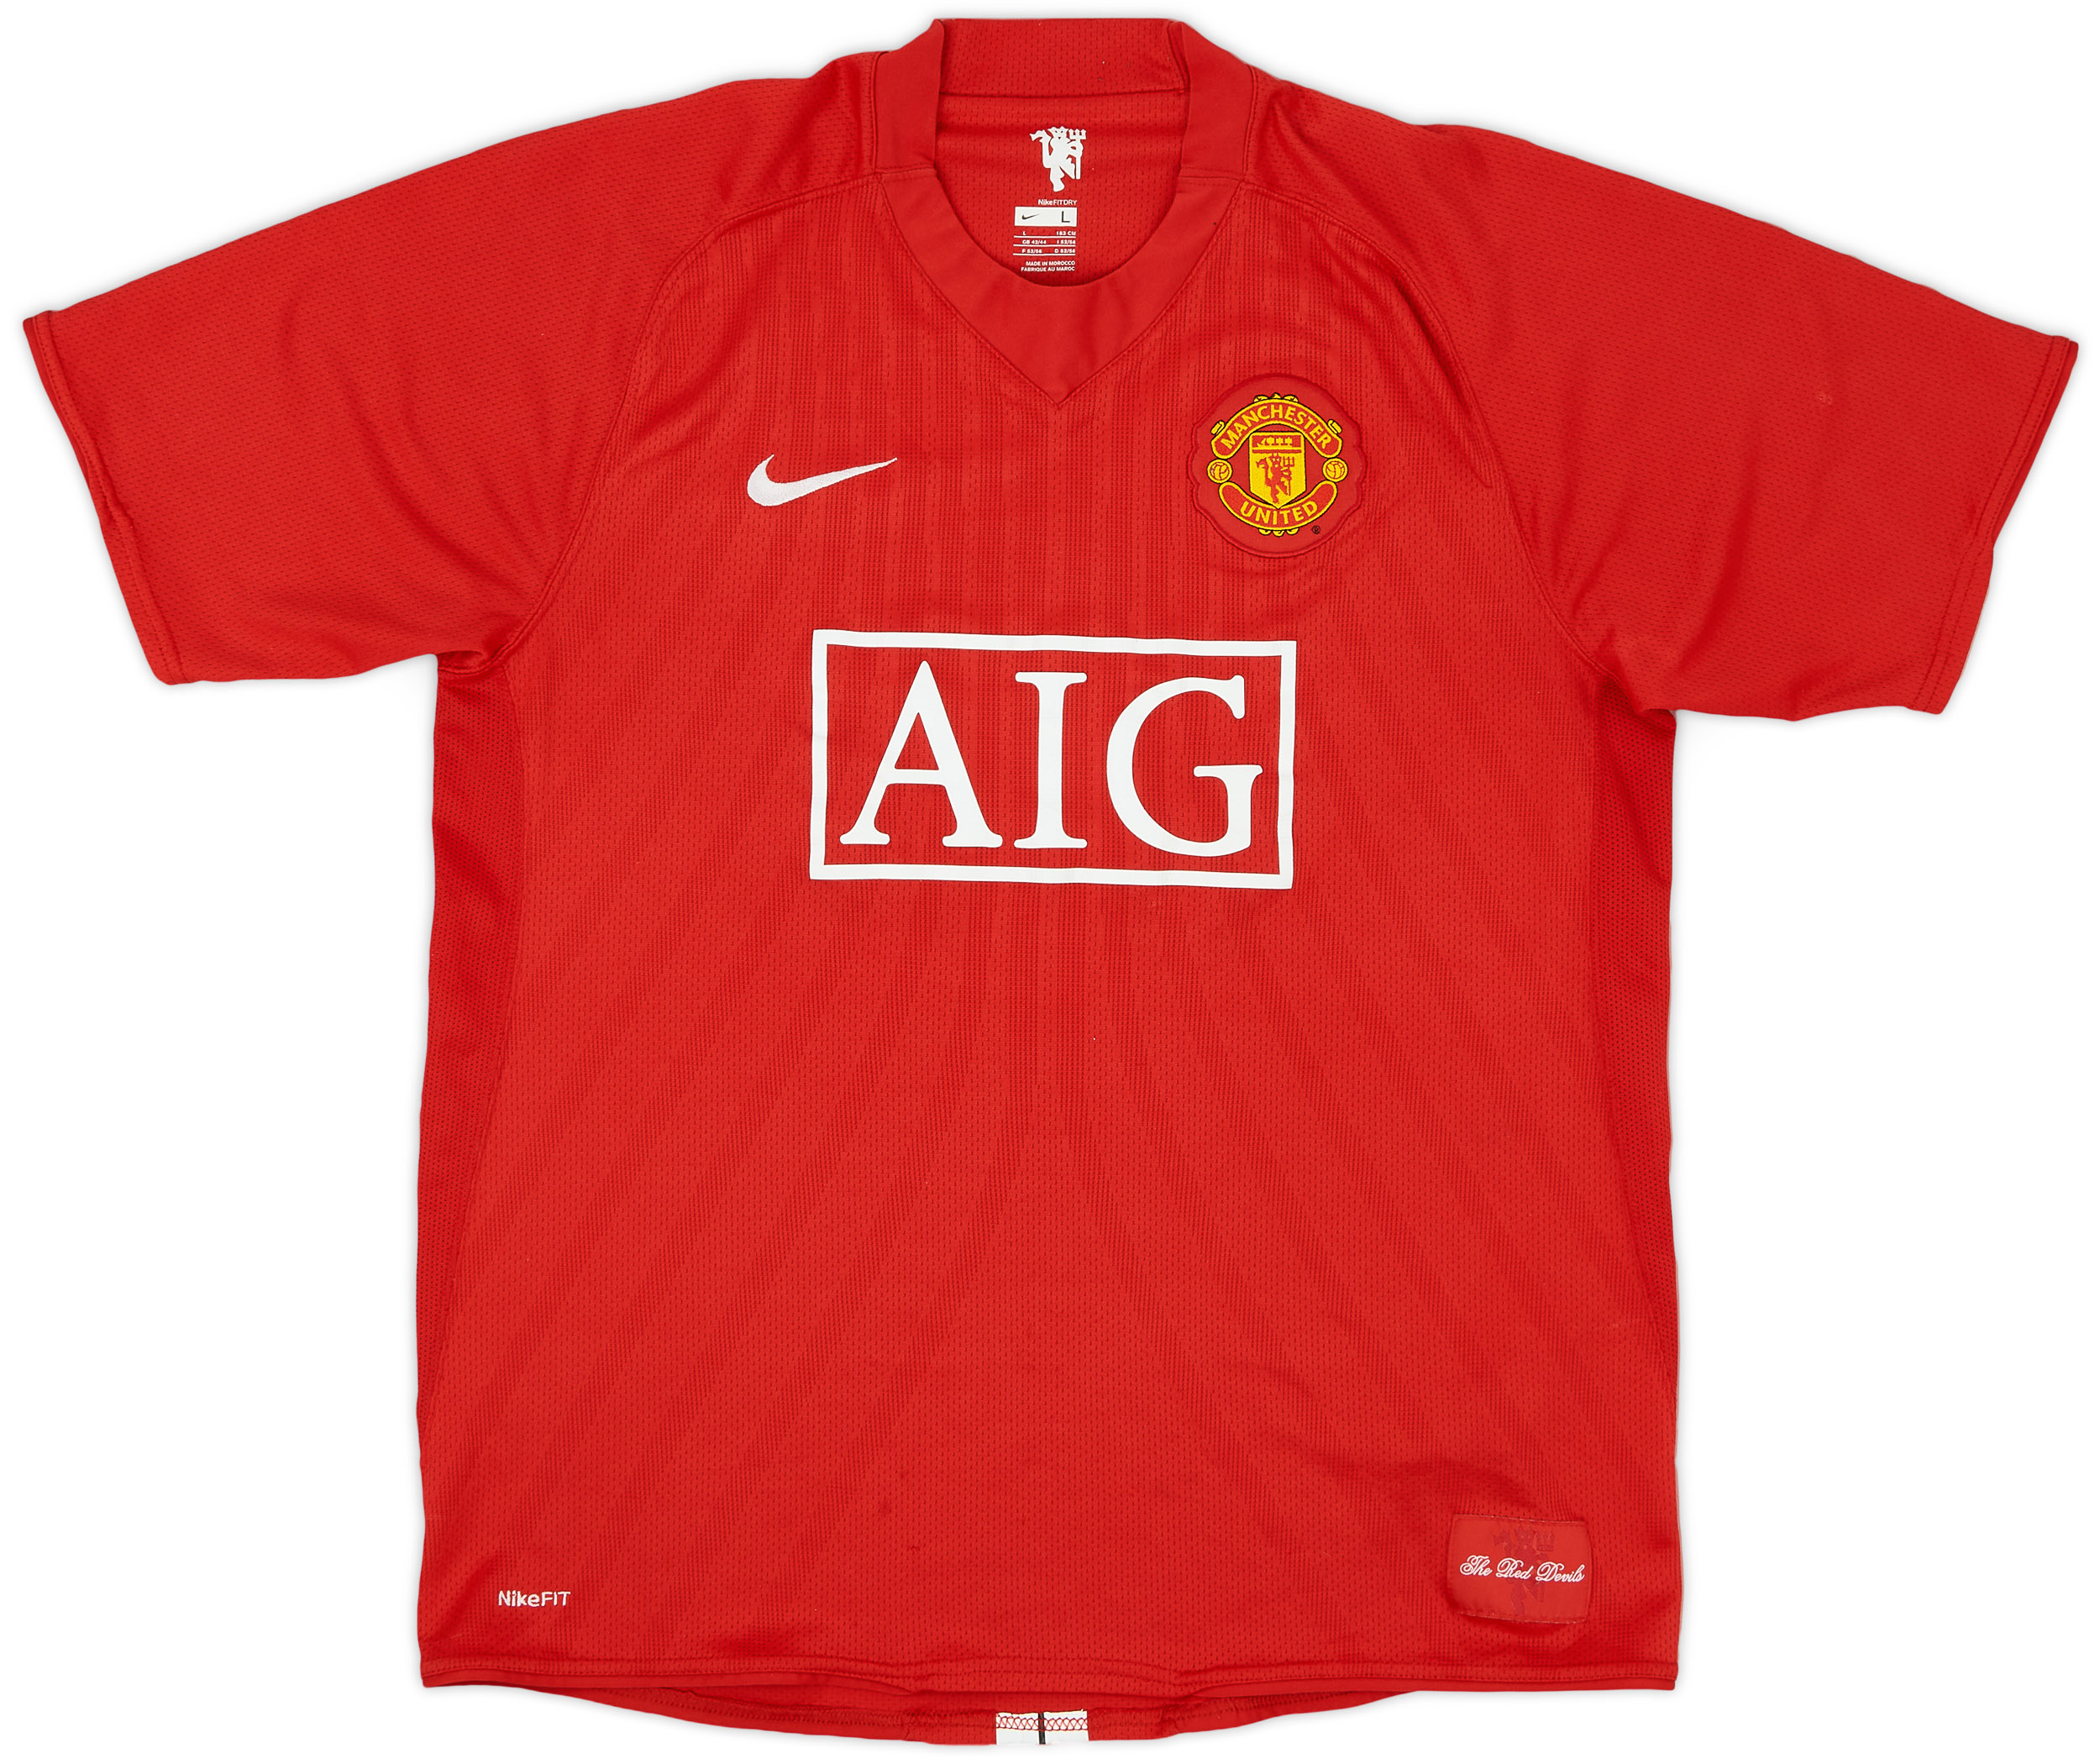 2007-09 Manchester United Home Shirt - 4/10 - ()